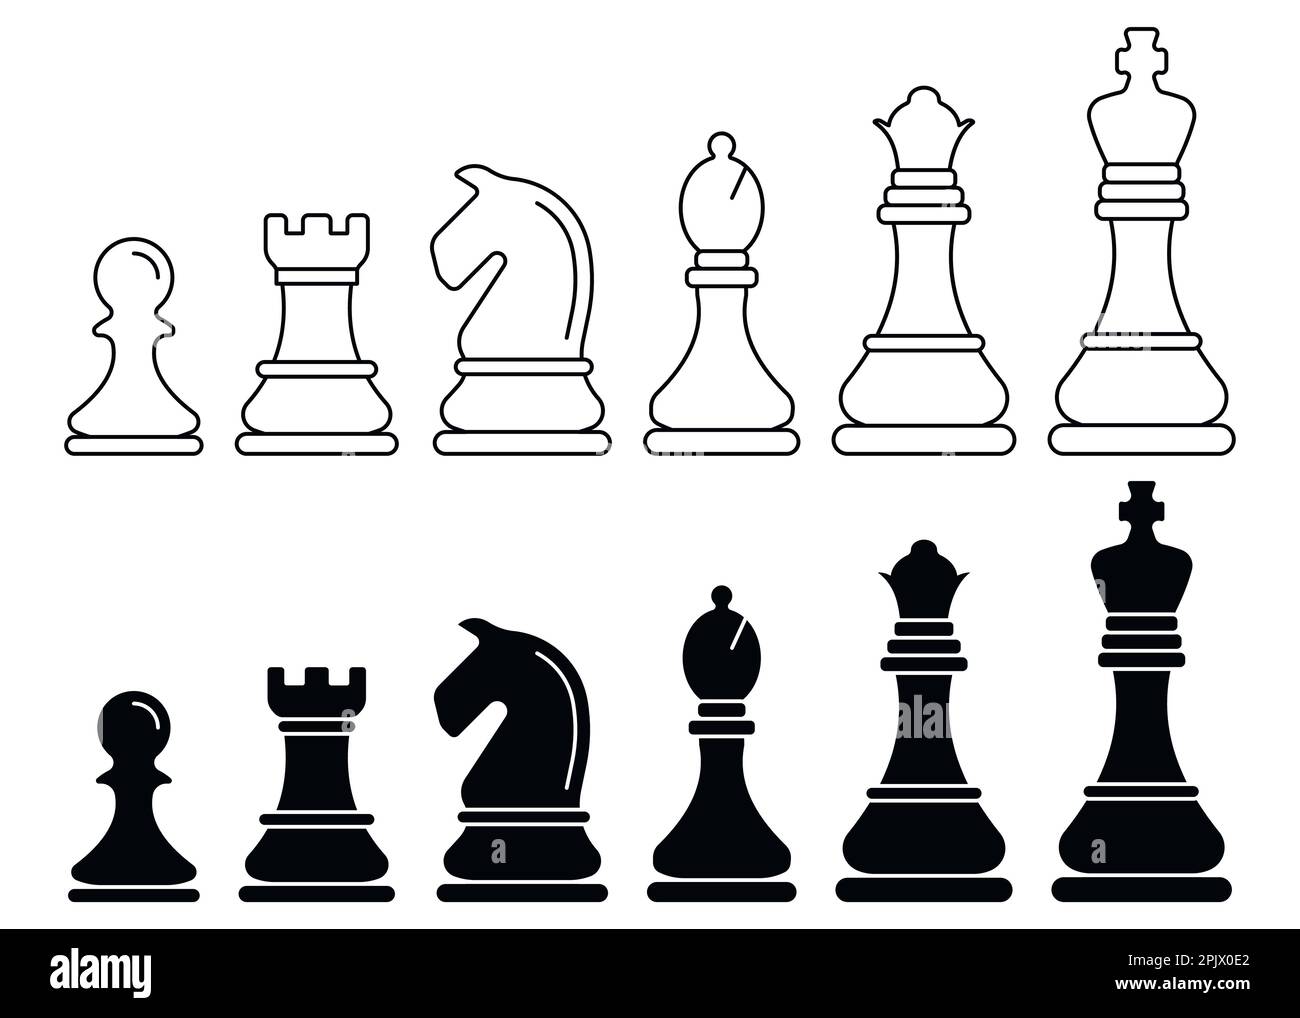 Chess pieces icon. Chess icons. King, queen, rook, knight, bishop, pawn. Vector illustration. Eps 10. Stock Vector